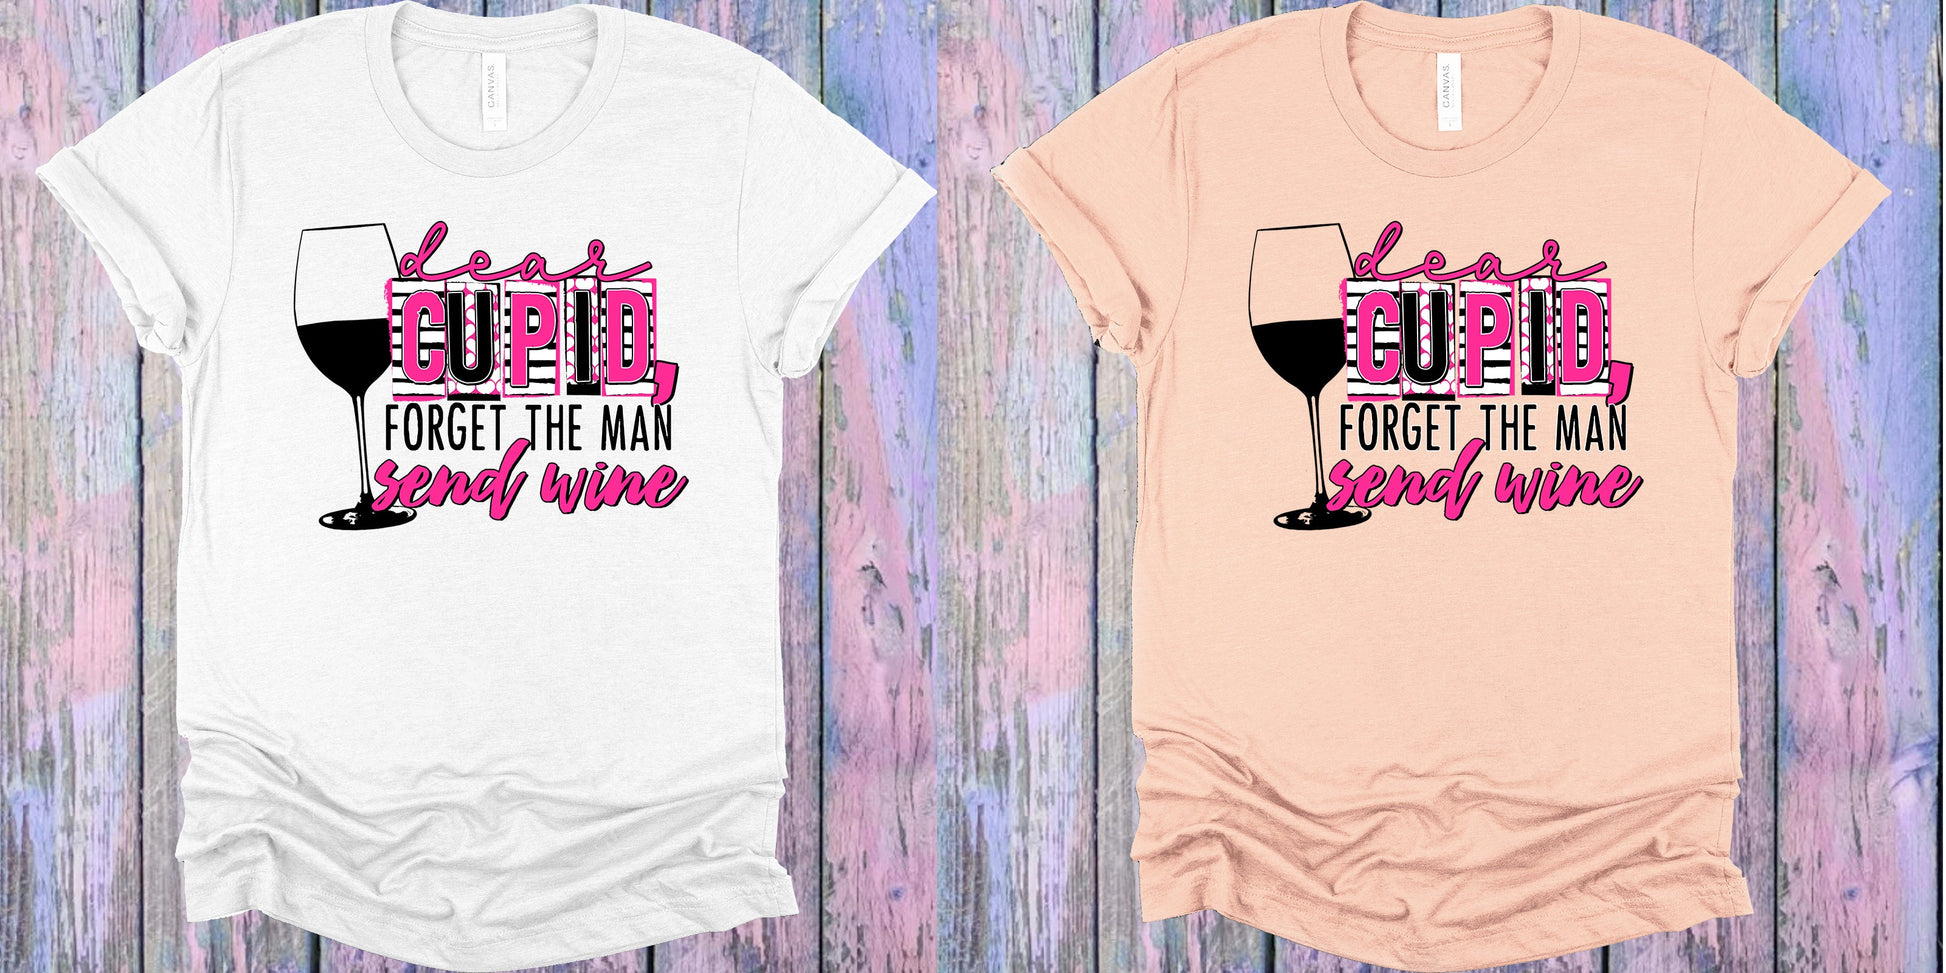 Dear Cupid Forget The Man Send Wine Graphic Tee Graphic Tee